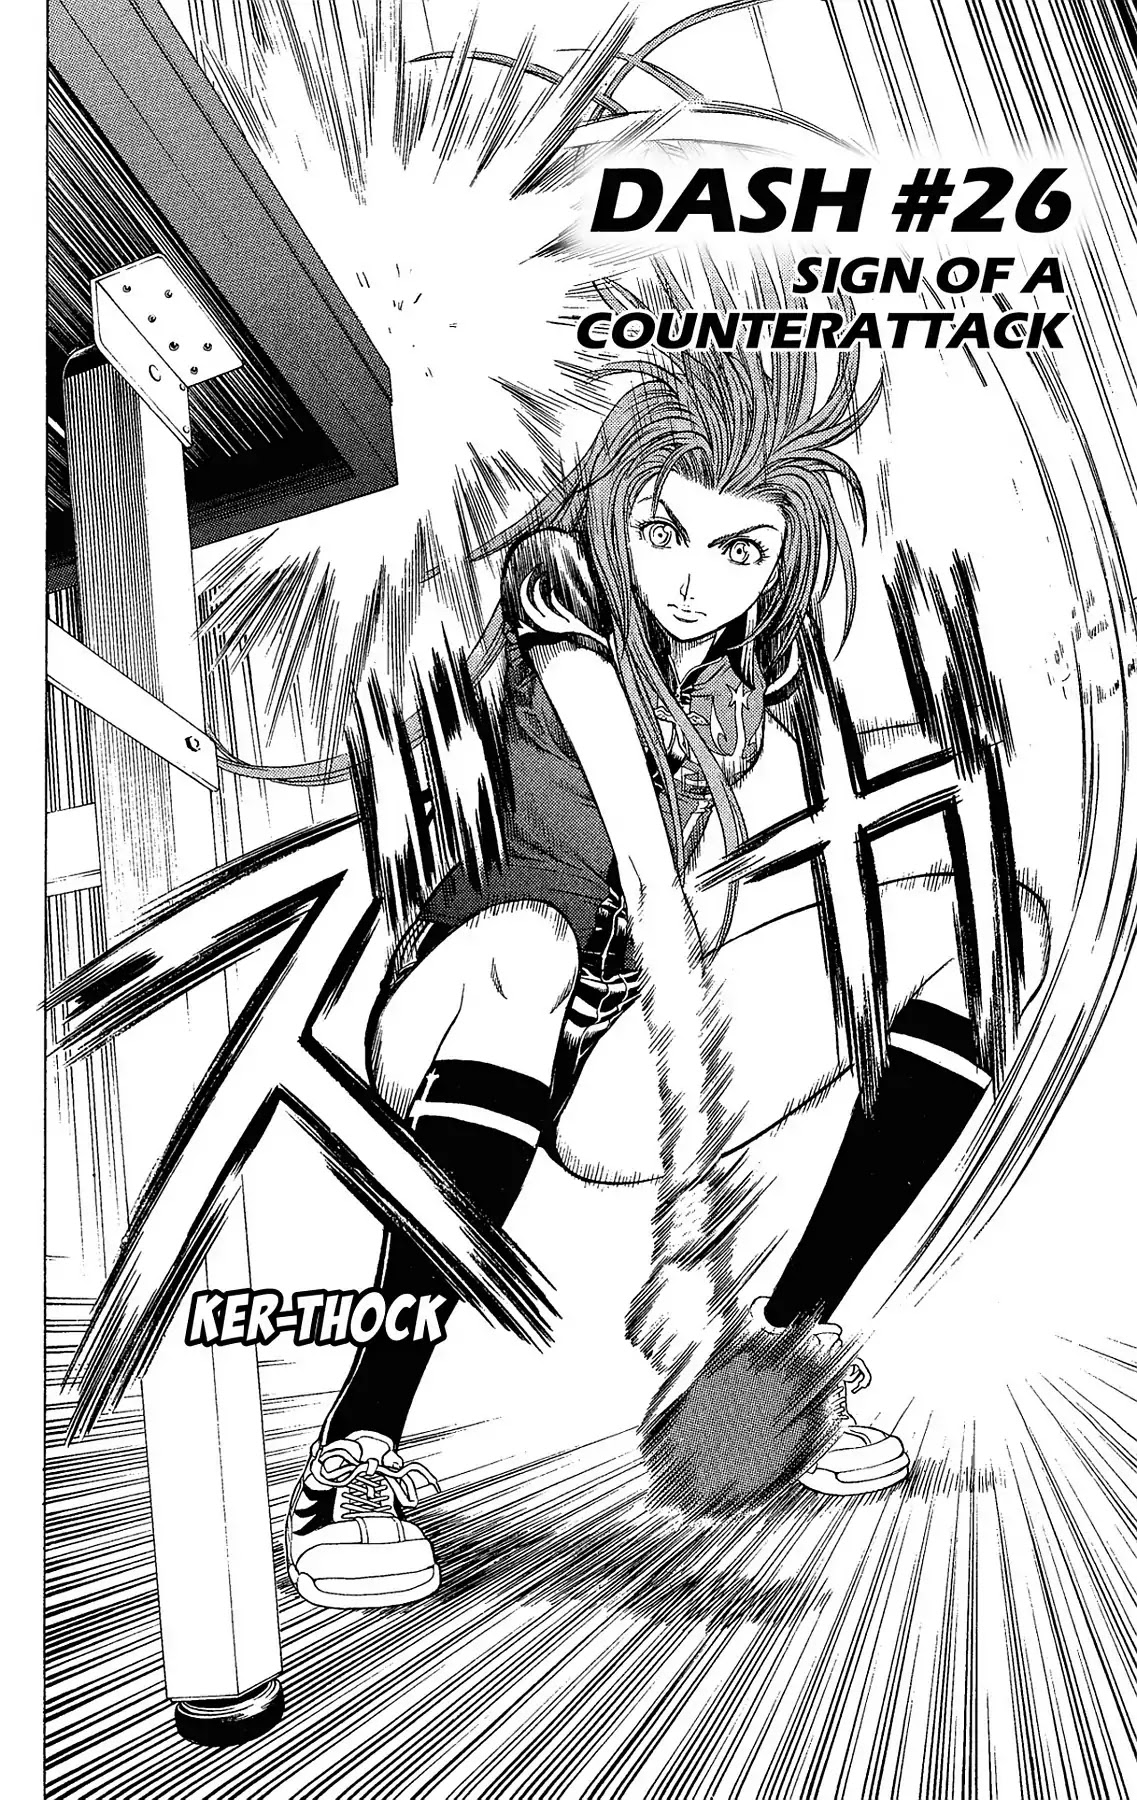 Takkyuu Dash!! Chapter 26: VOL.7 DASH #26: SIGN OF ACOUNTED ATTACK